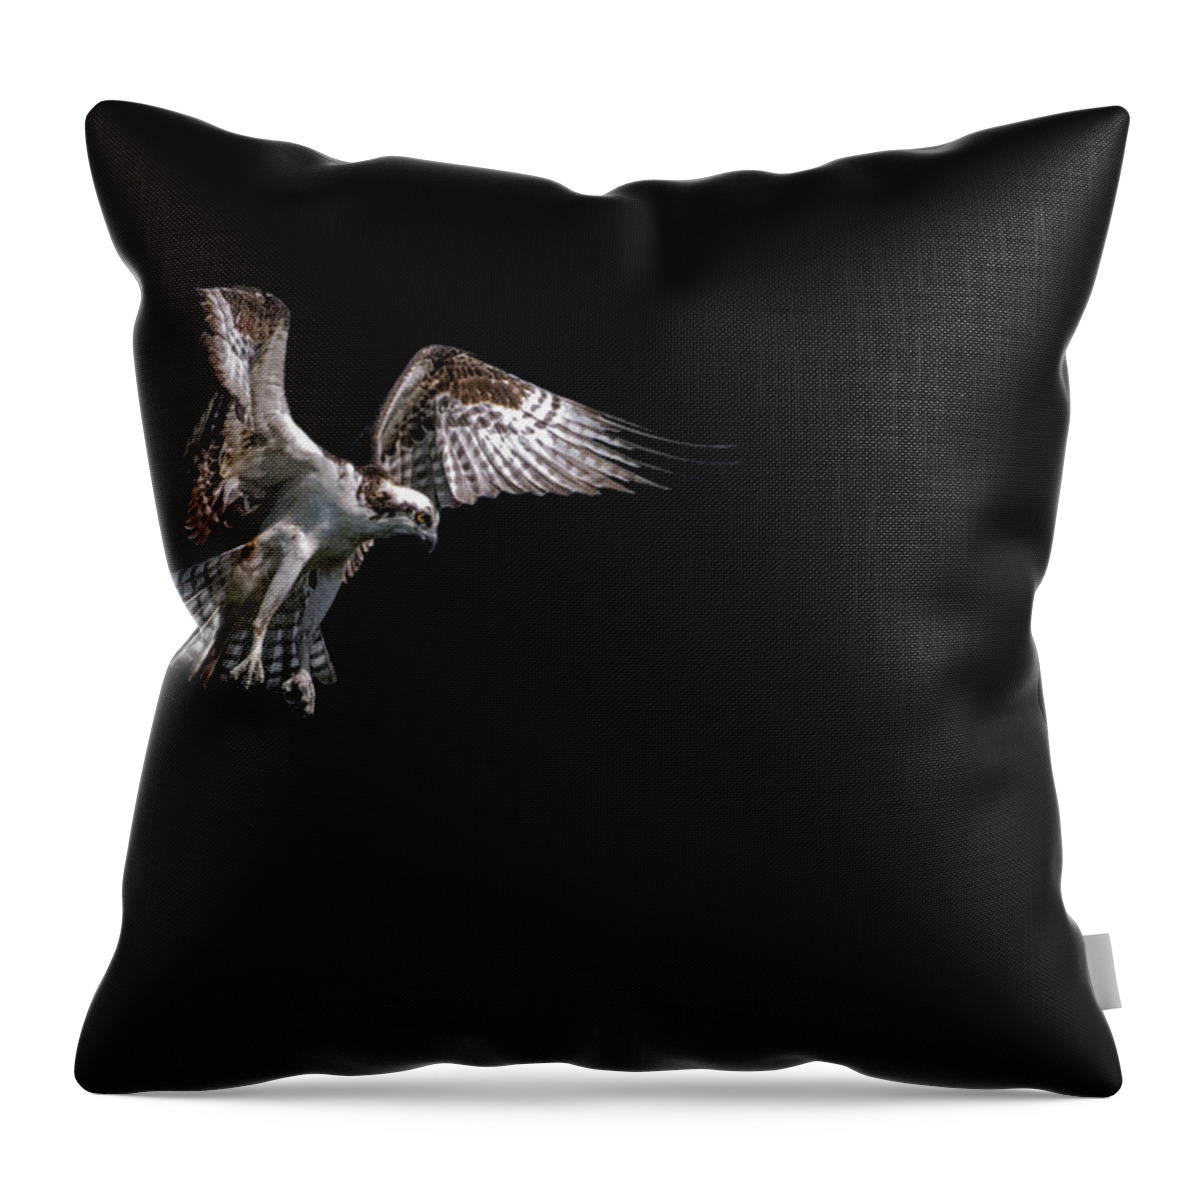 Crystal Yingling Throw Pillow featuring the photograph Gone Fishing by Ghostwinds Photography